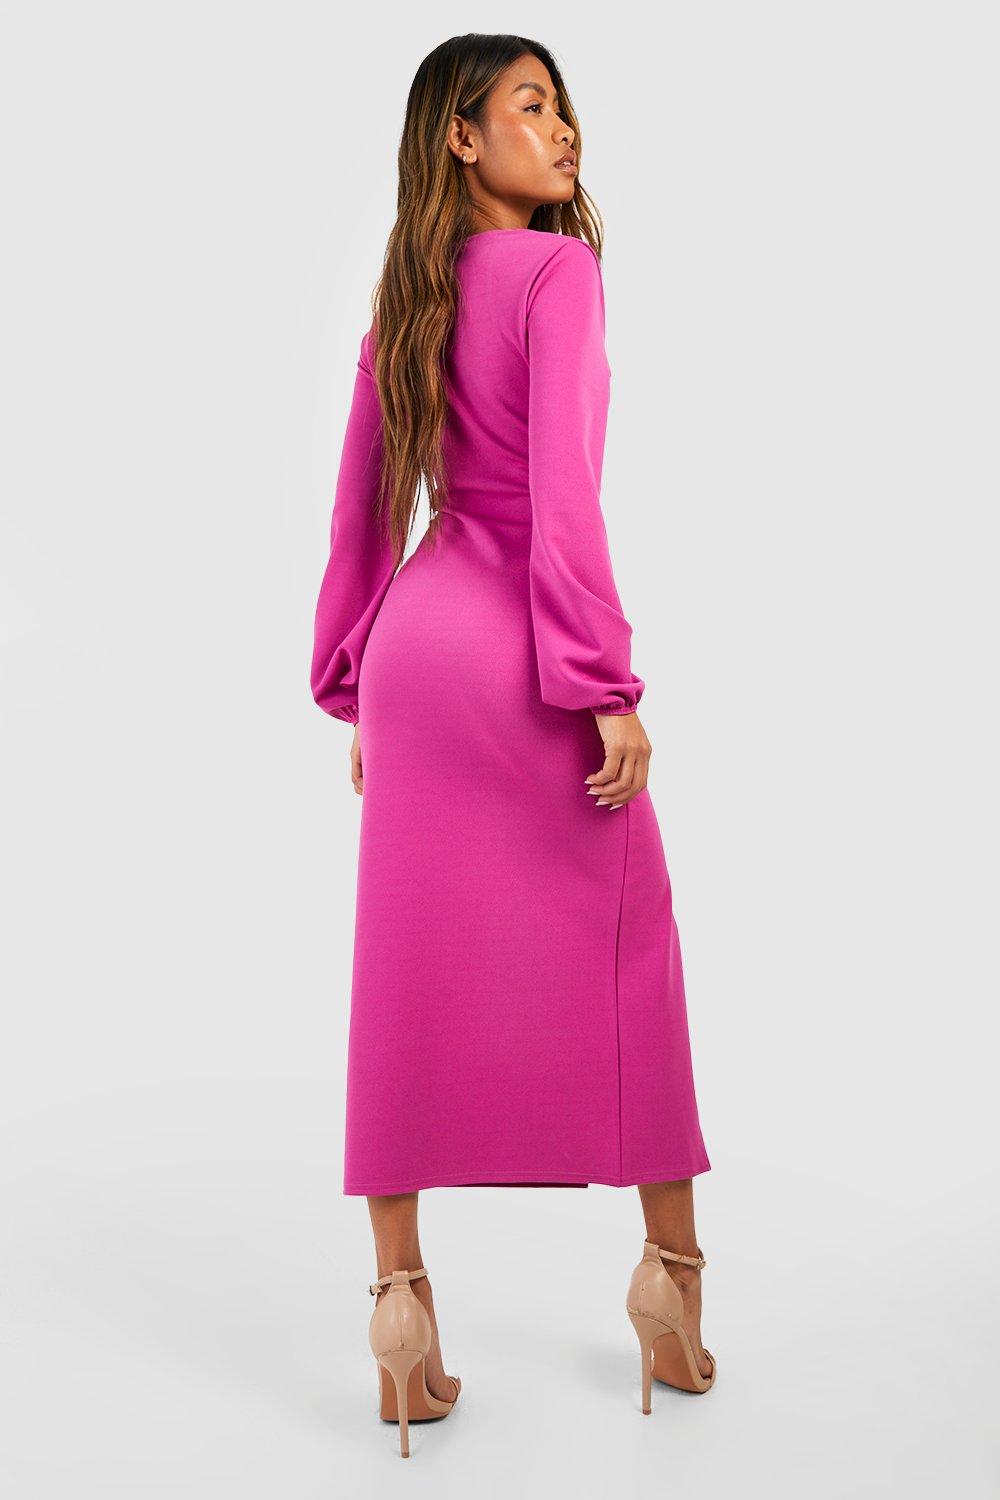 Buy Pink Zurich Plain Square Neck Corset Dress For Women by